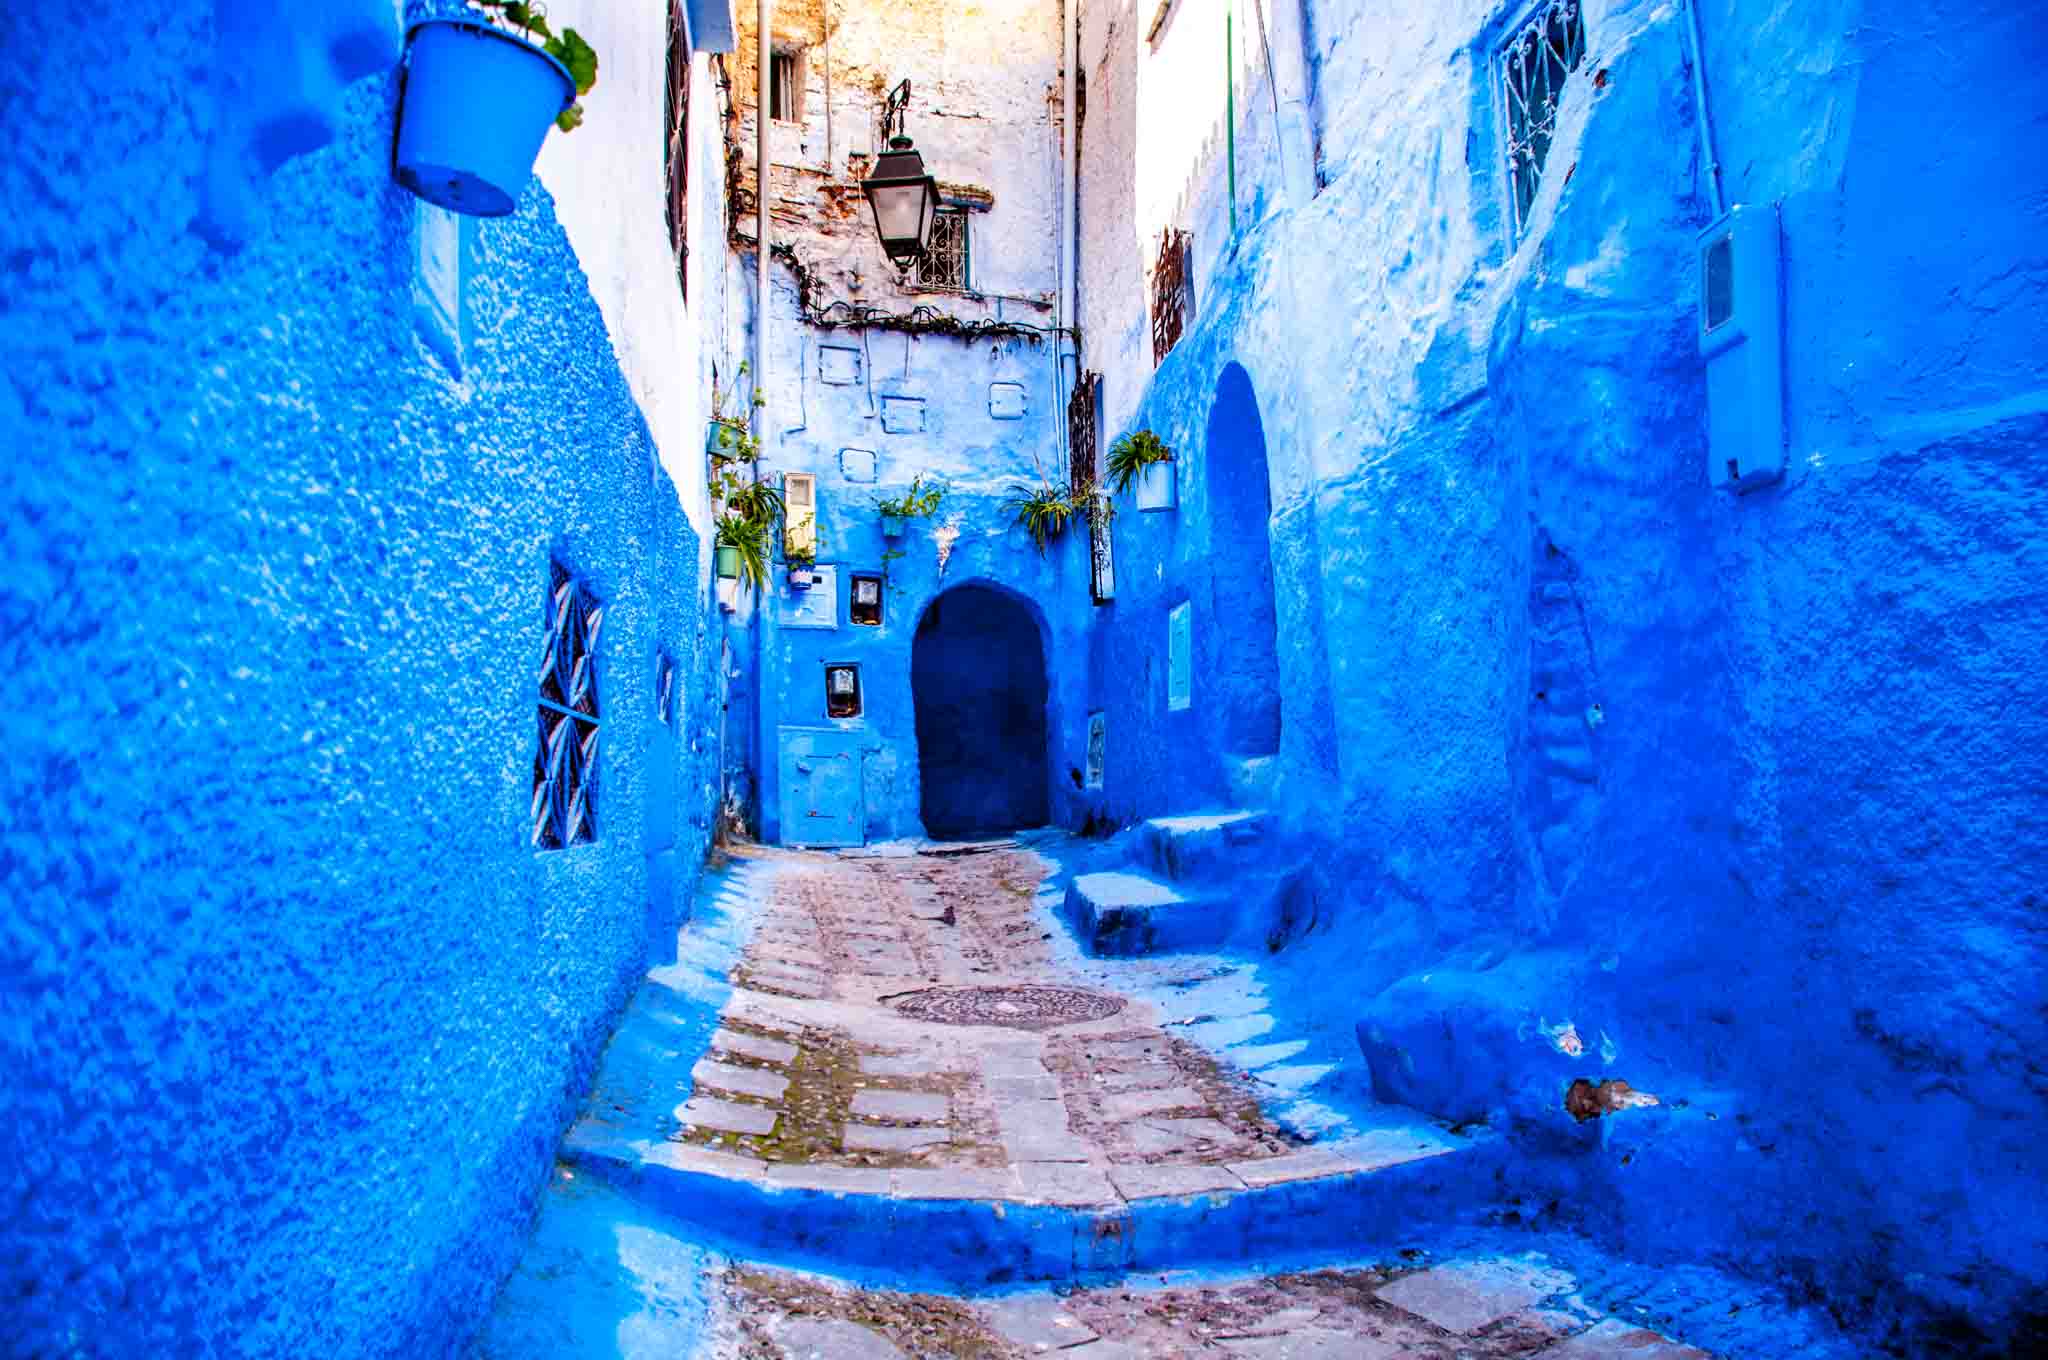 Alleyway in the Blue Pearl, Chefchaouen, Morocco.